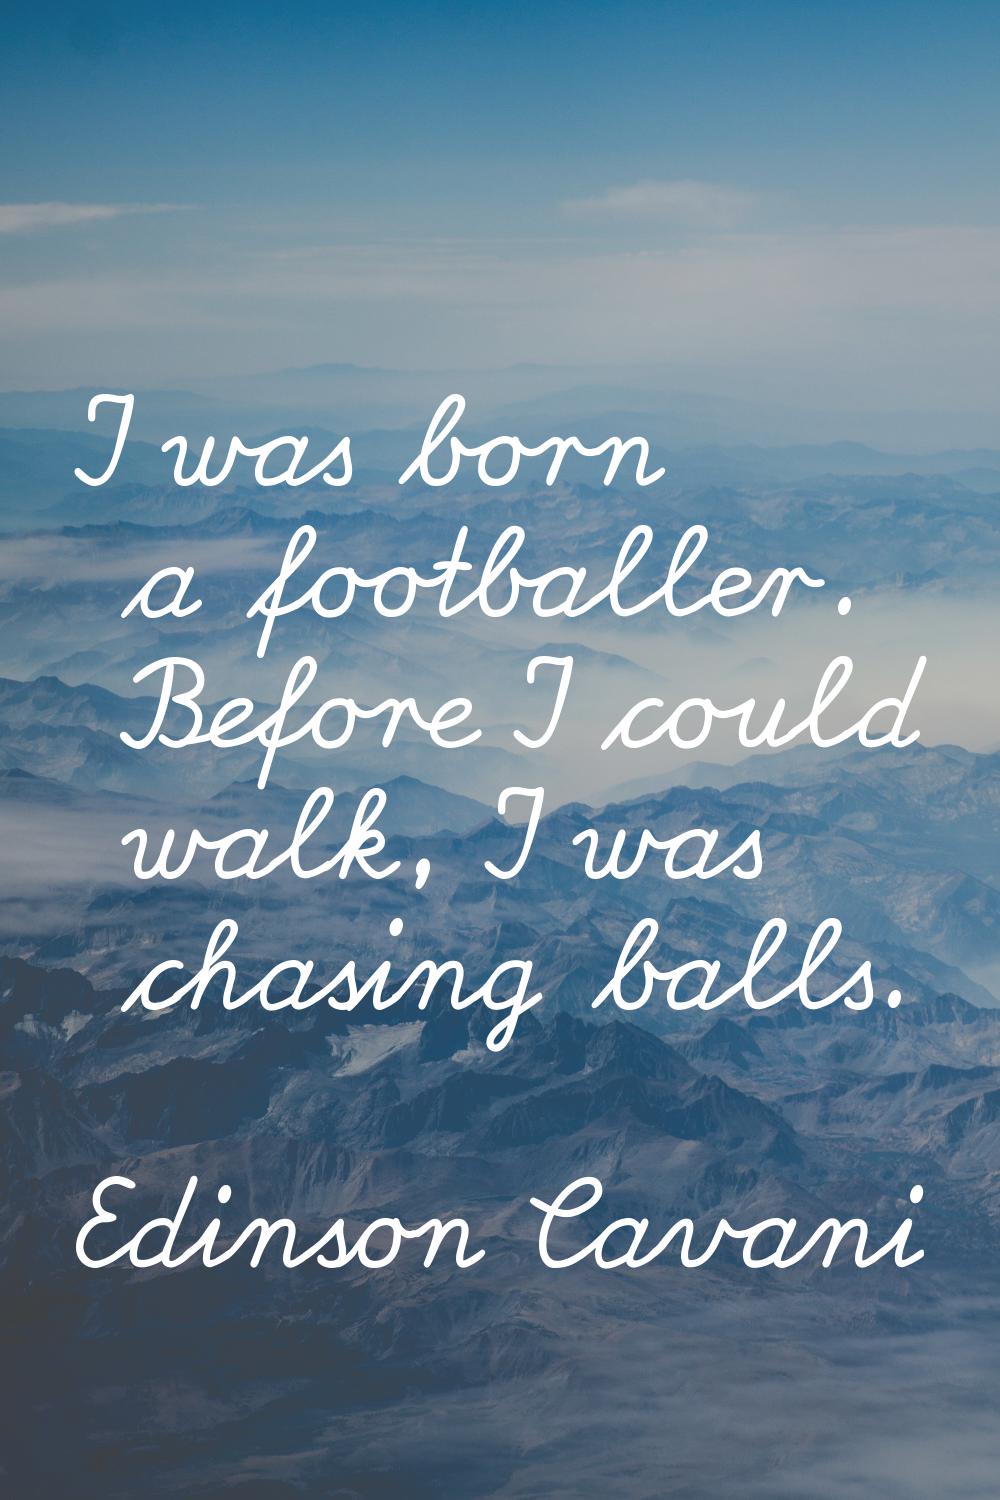 I was born a footballer. Before I could walk, I was chasing balls.